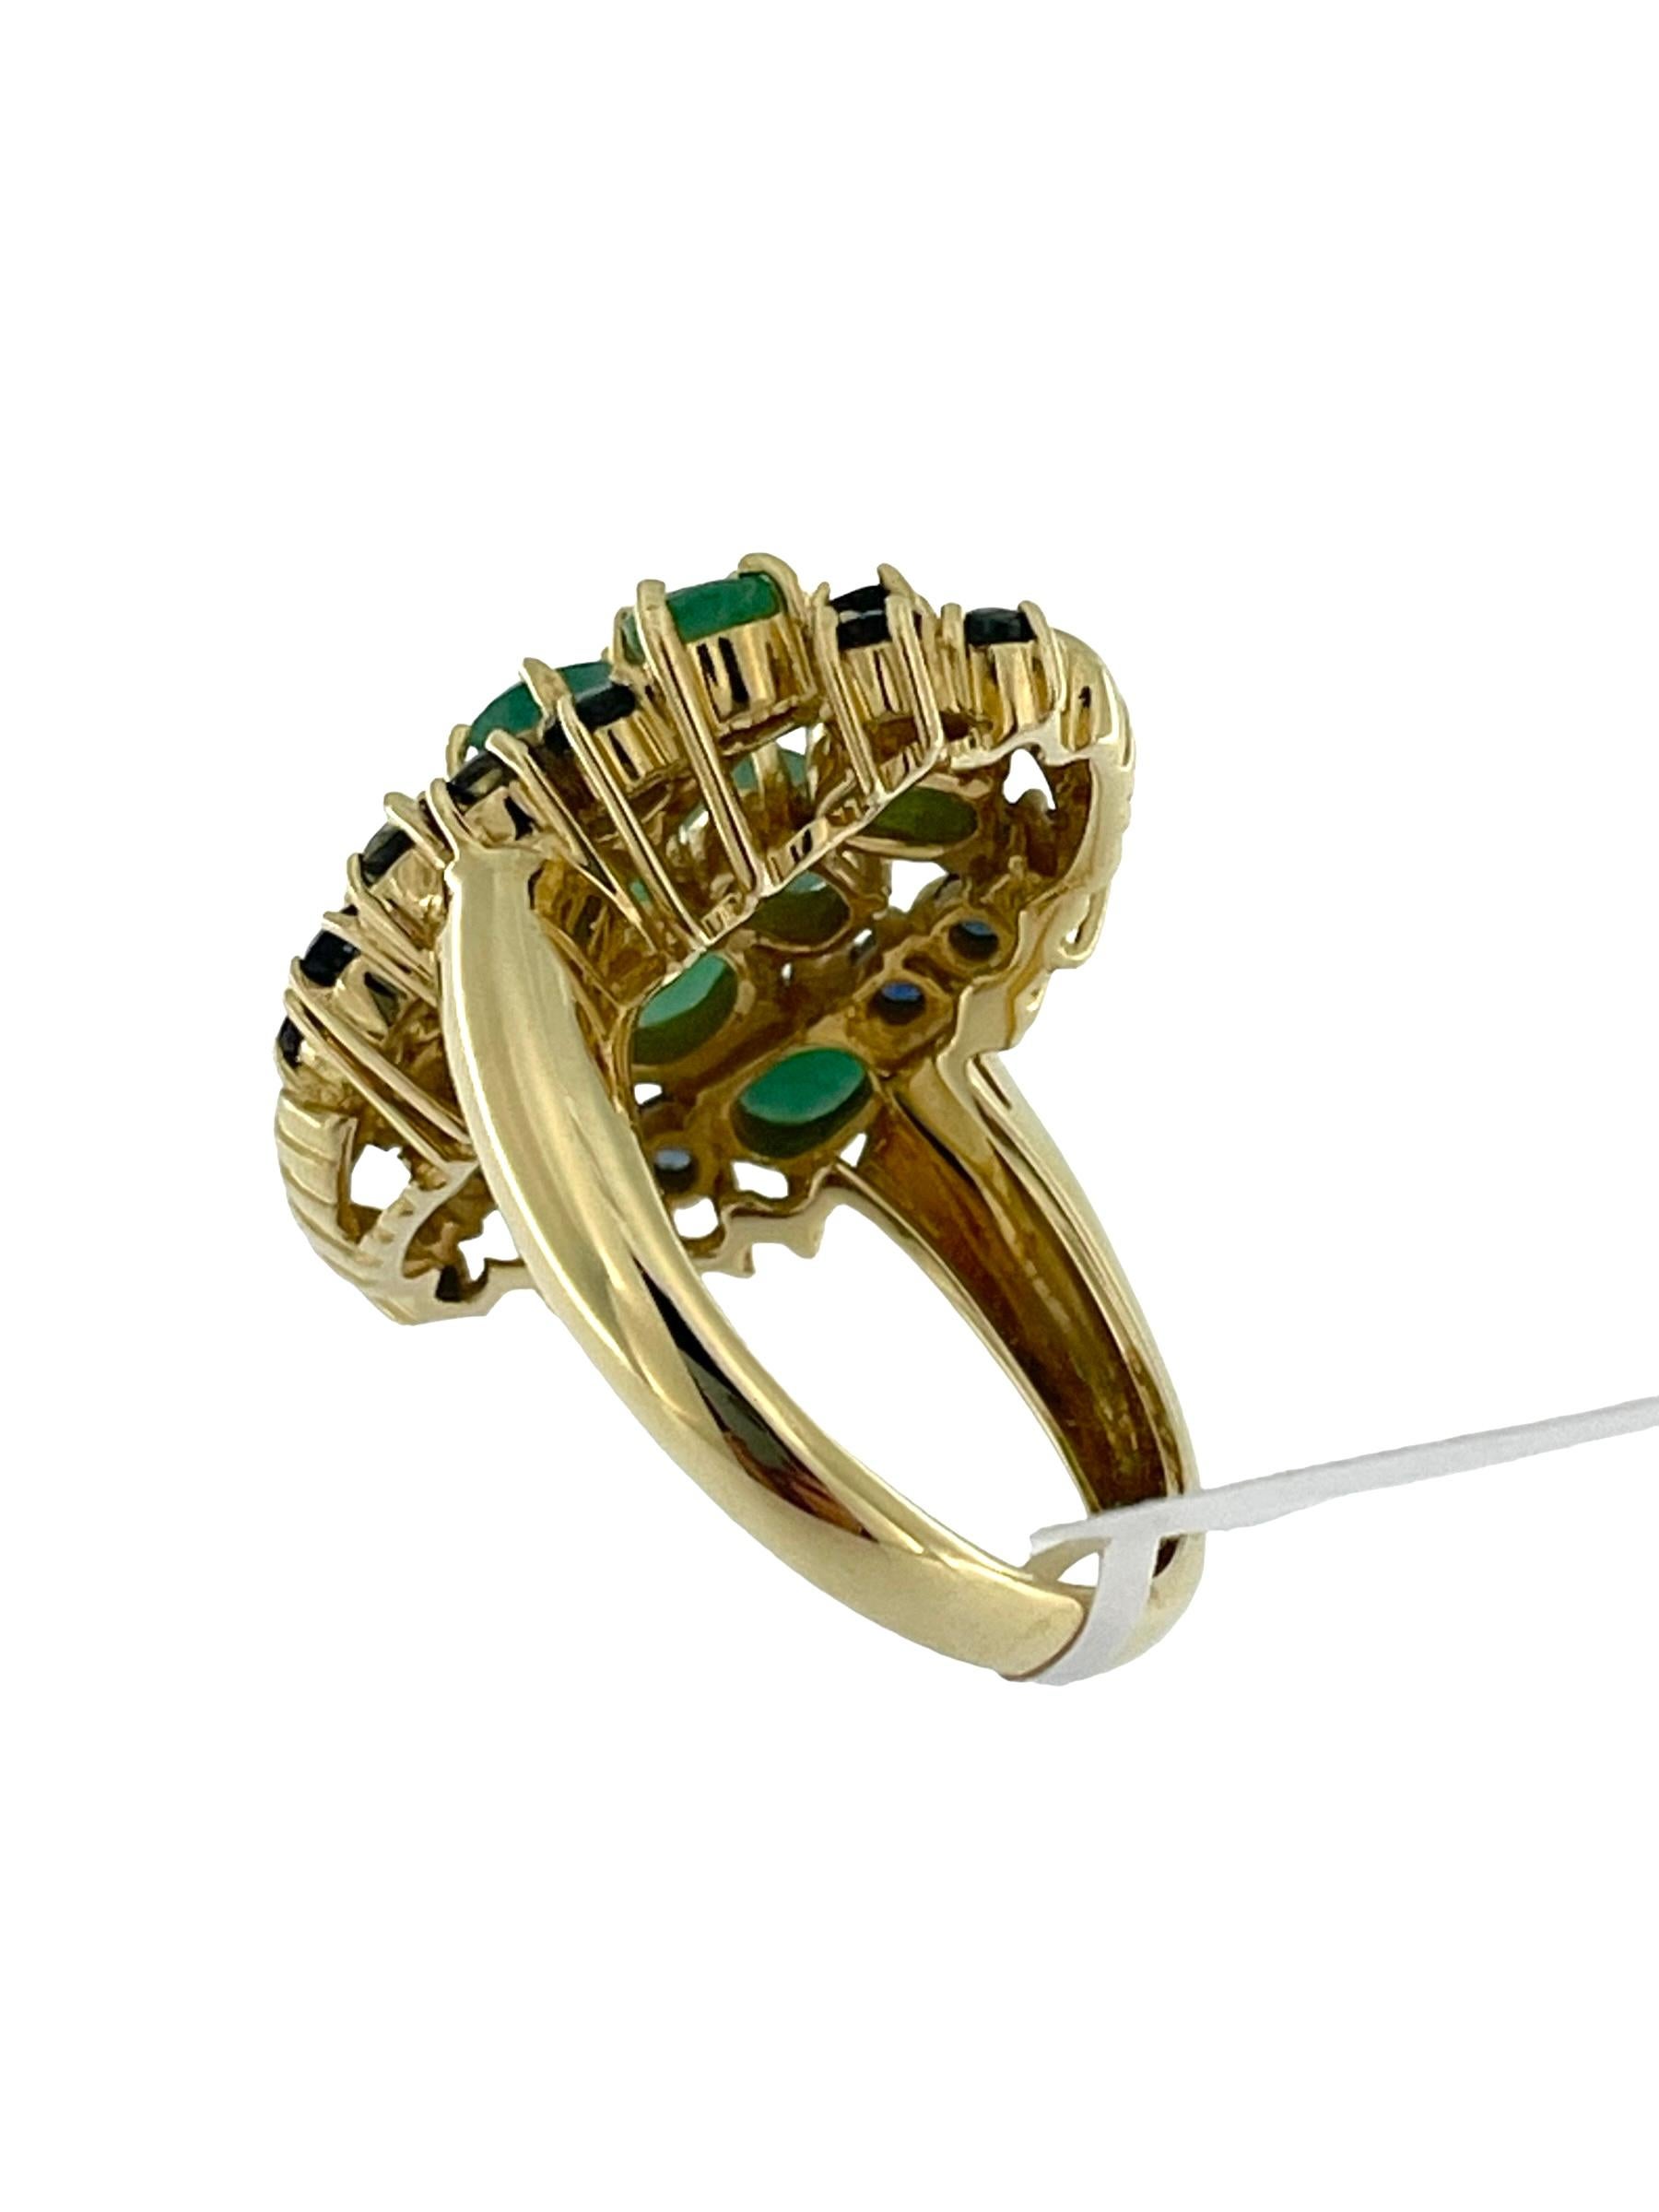 IGI Certified Yellow Gold Diamonds, Sapphires and Emeralds Cocktail Ring  For Sale 2